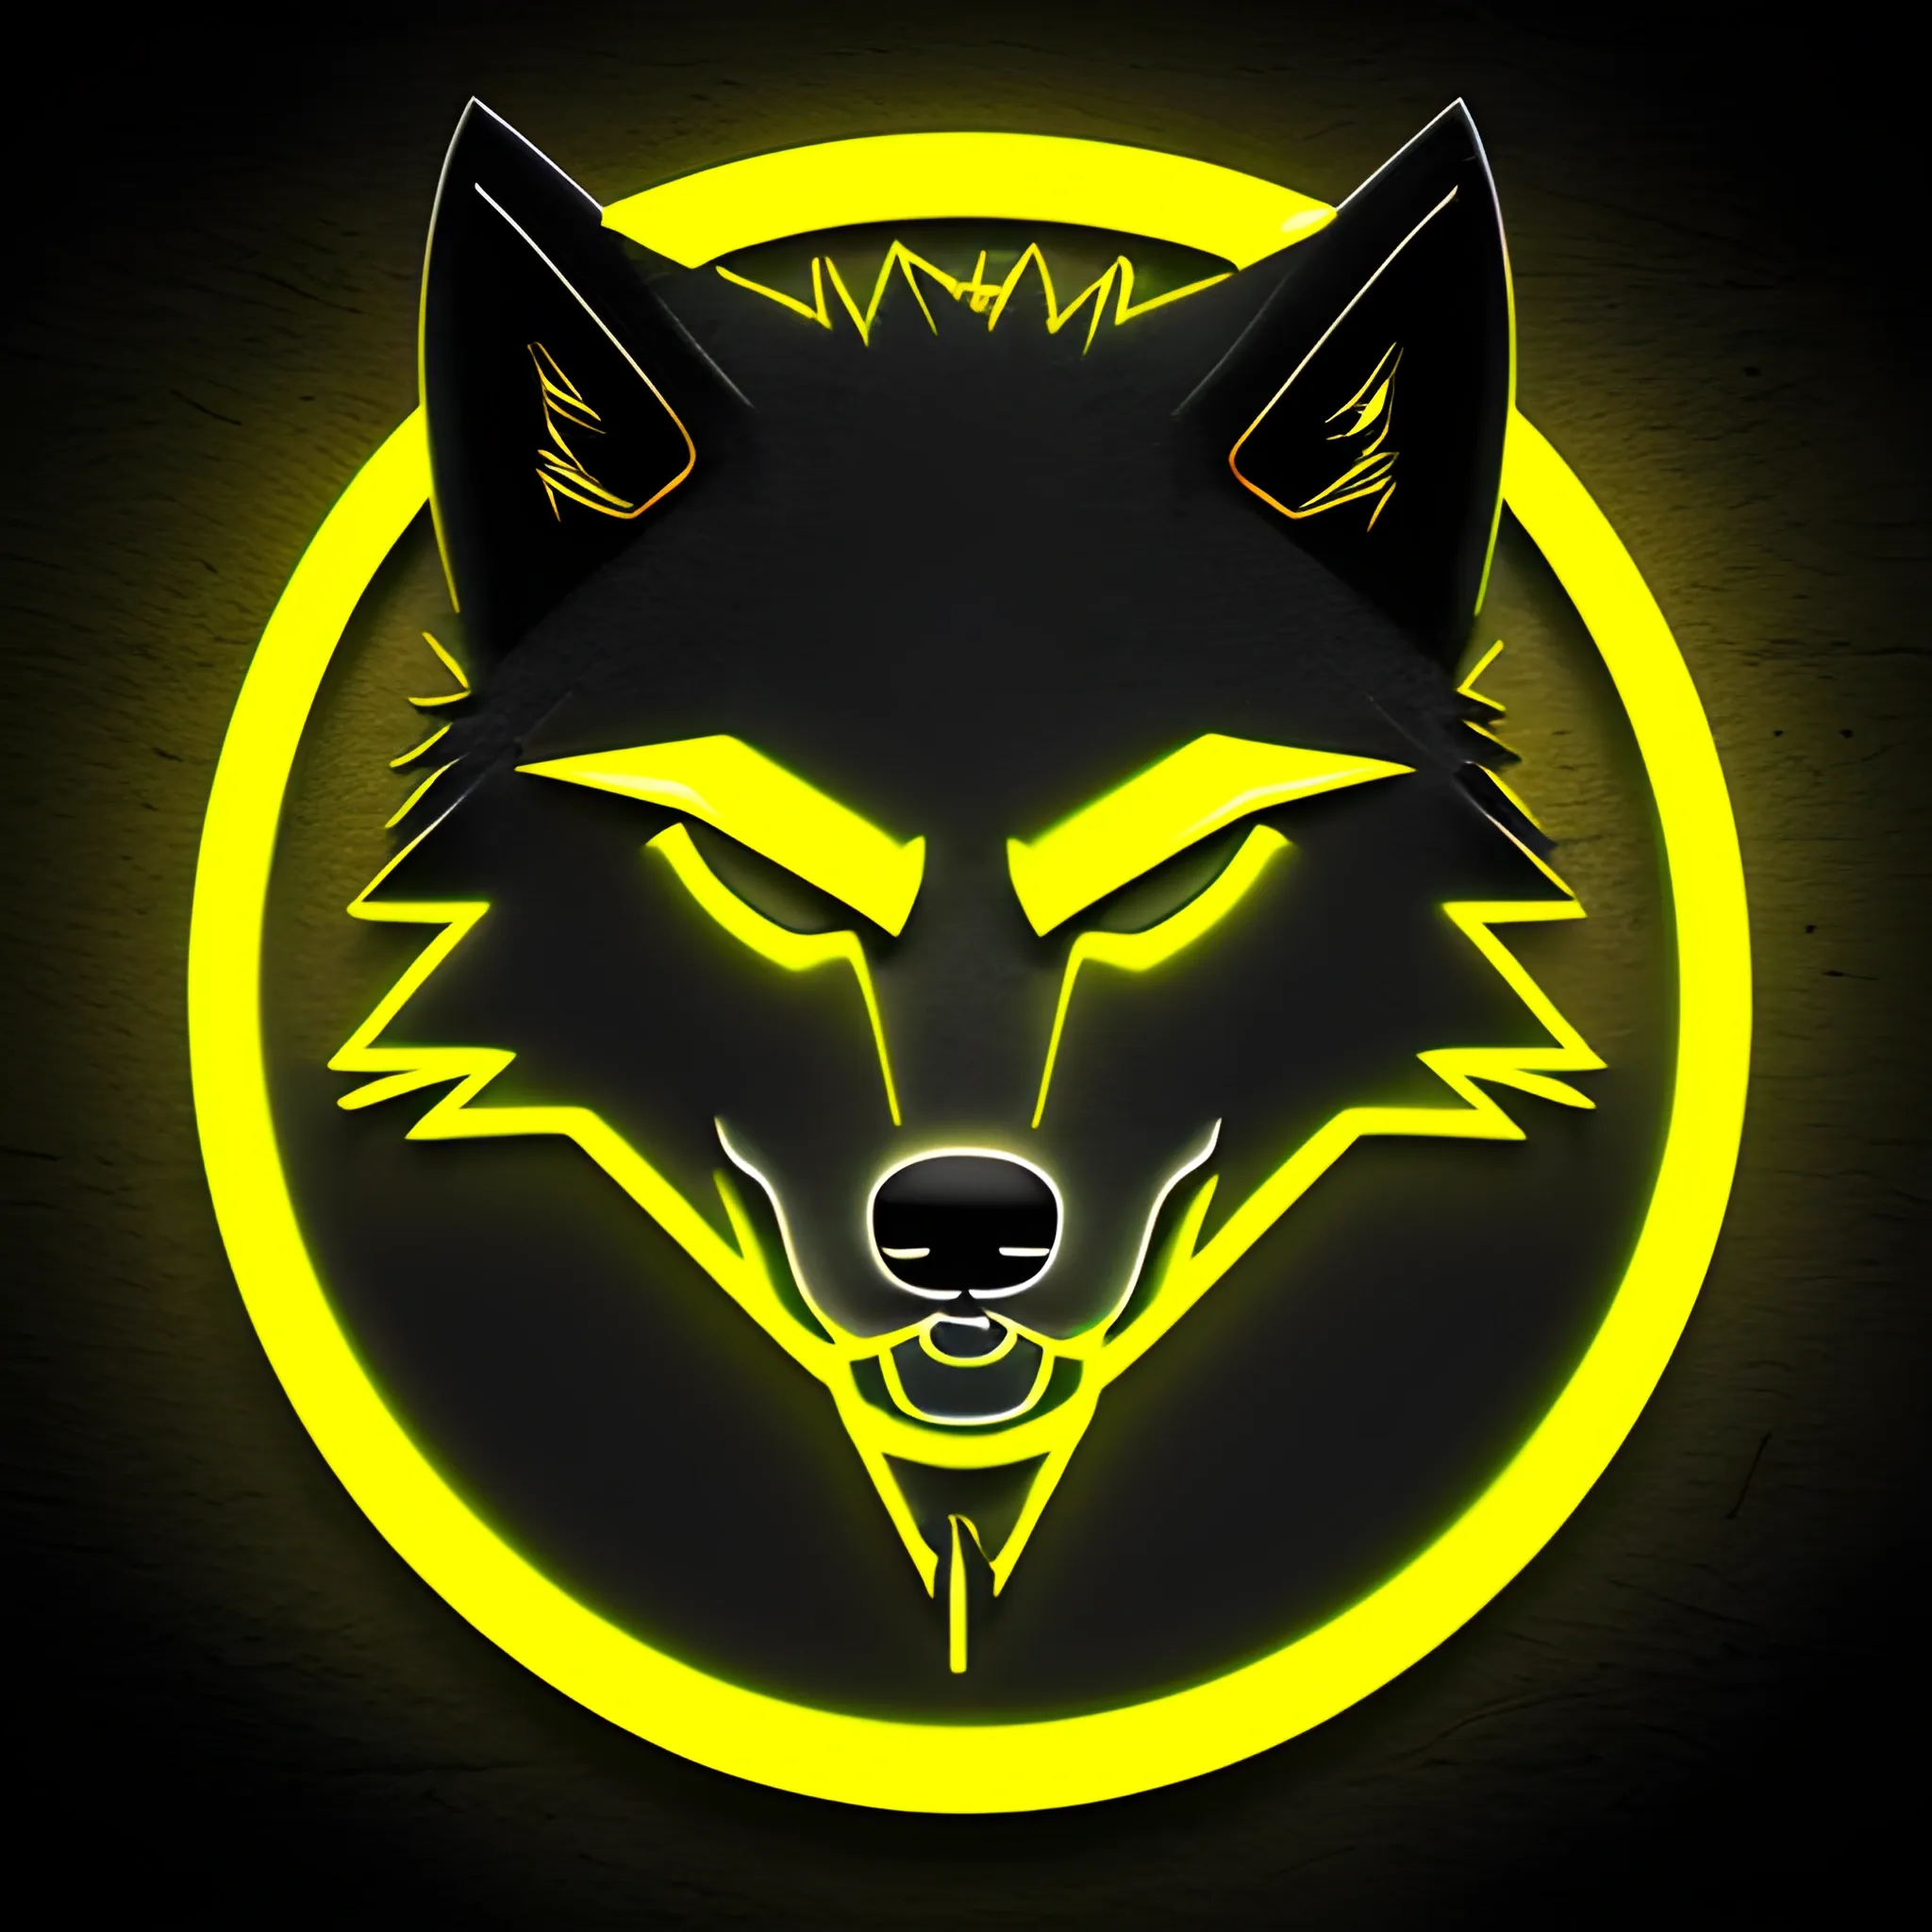 An angry hacker wolf logo with the letter "A" at the background, using the yellow neon color, 3D